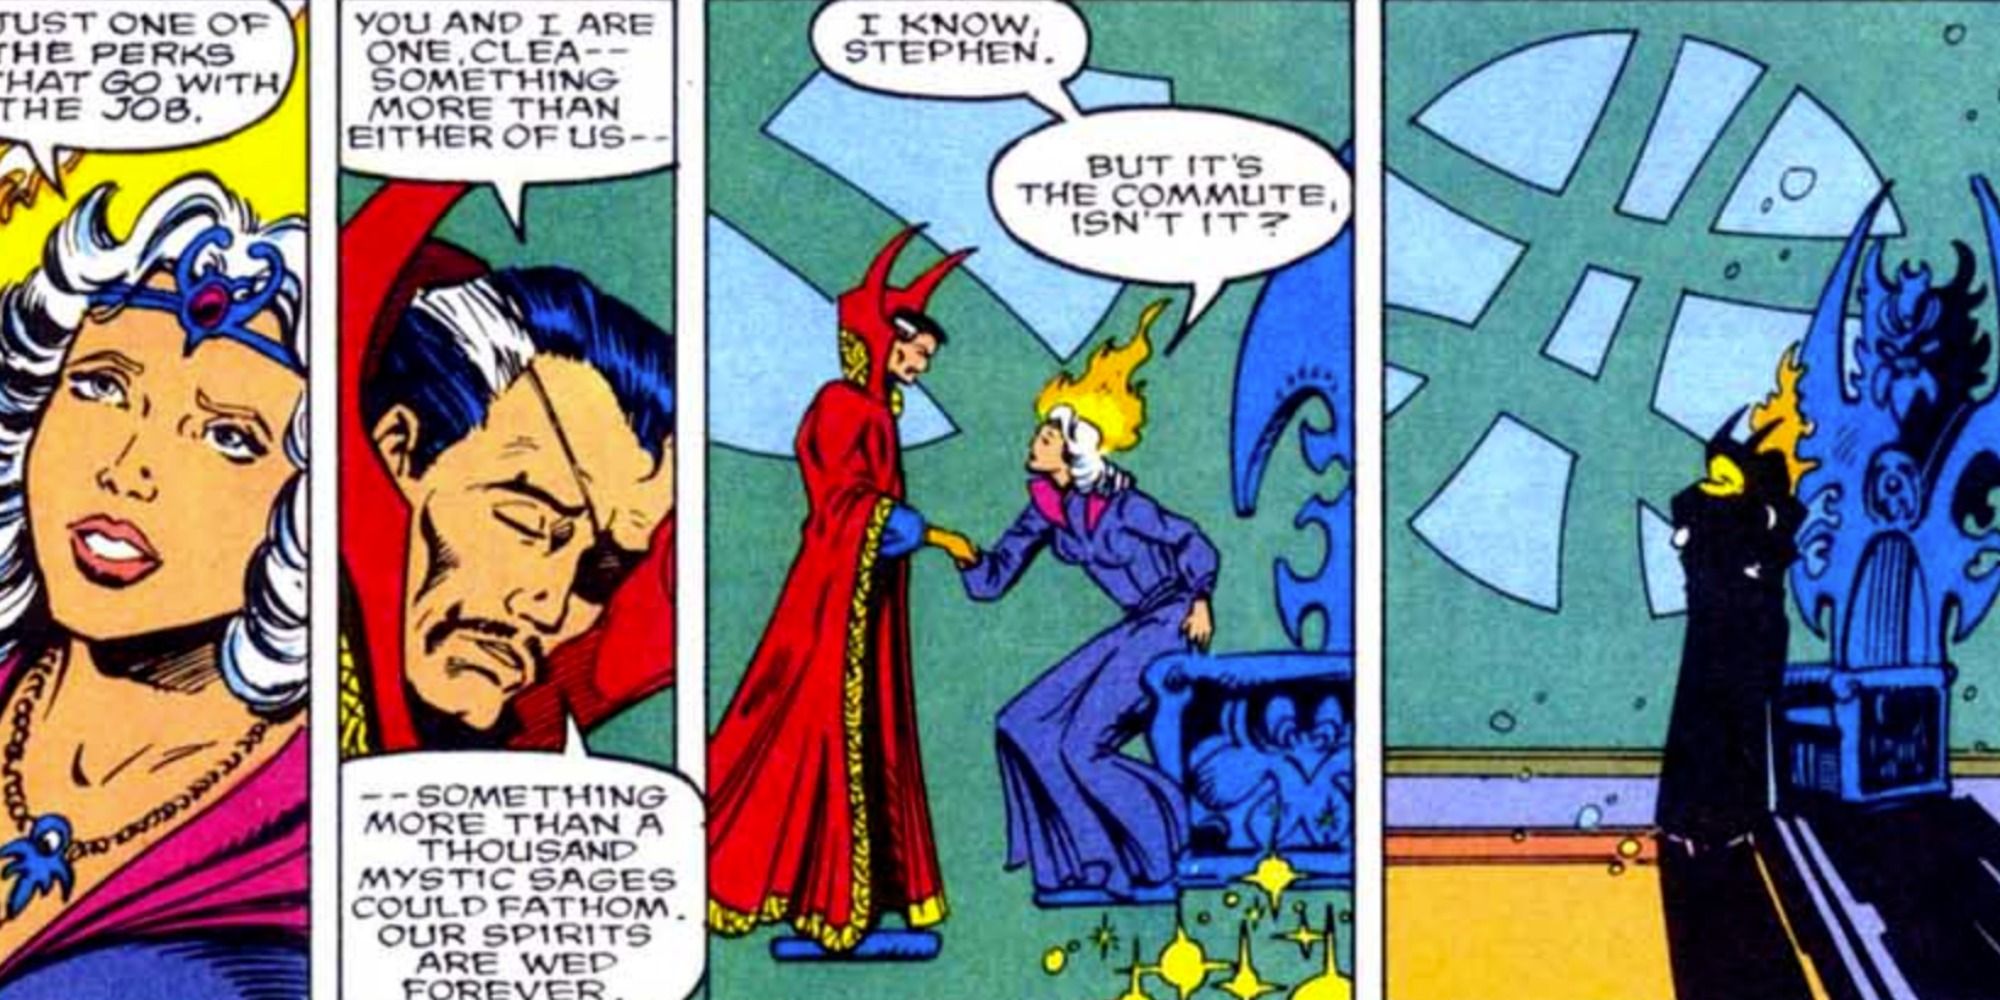 Clea and Doctor Strange wed in Marvel Comics.